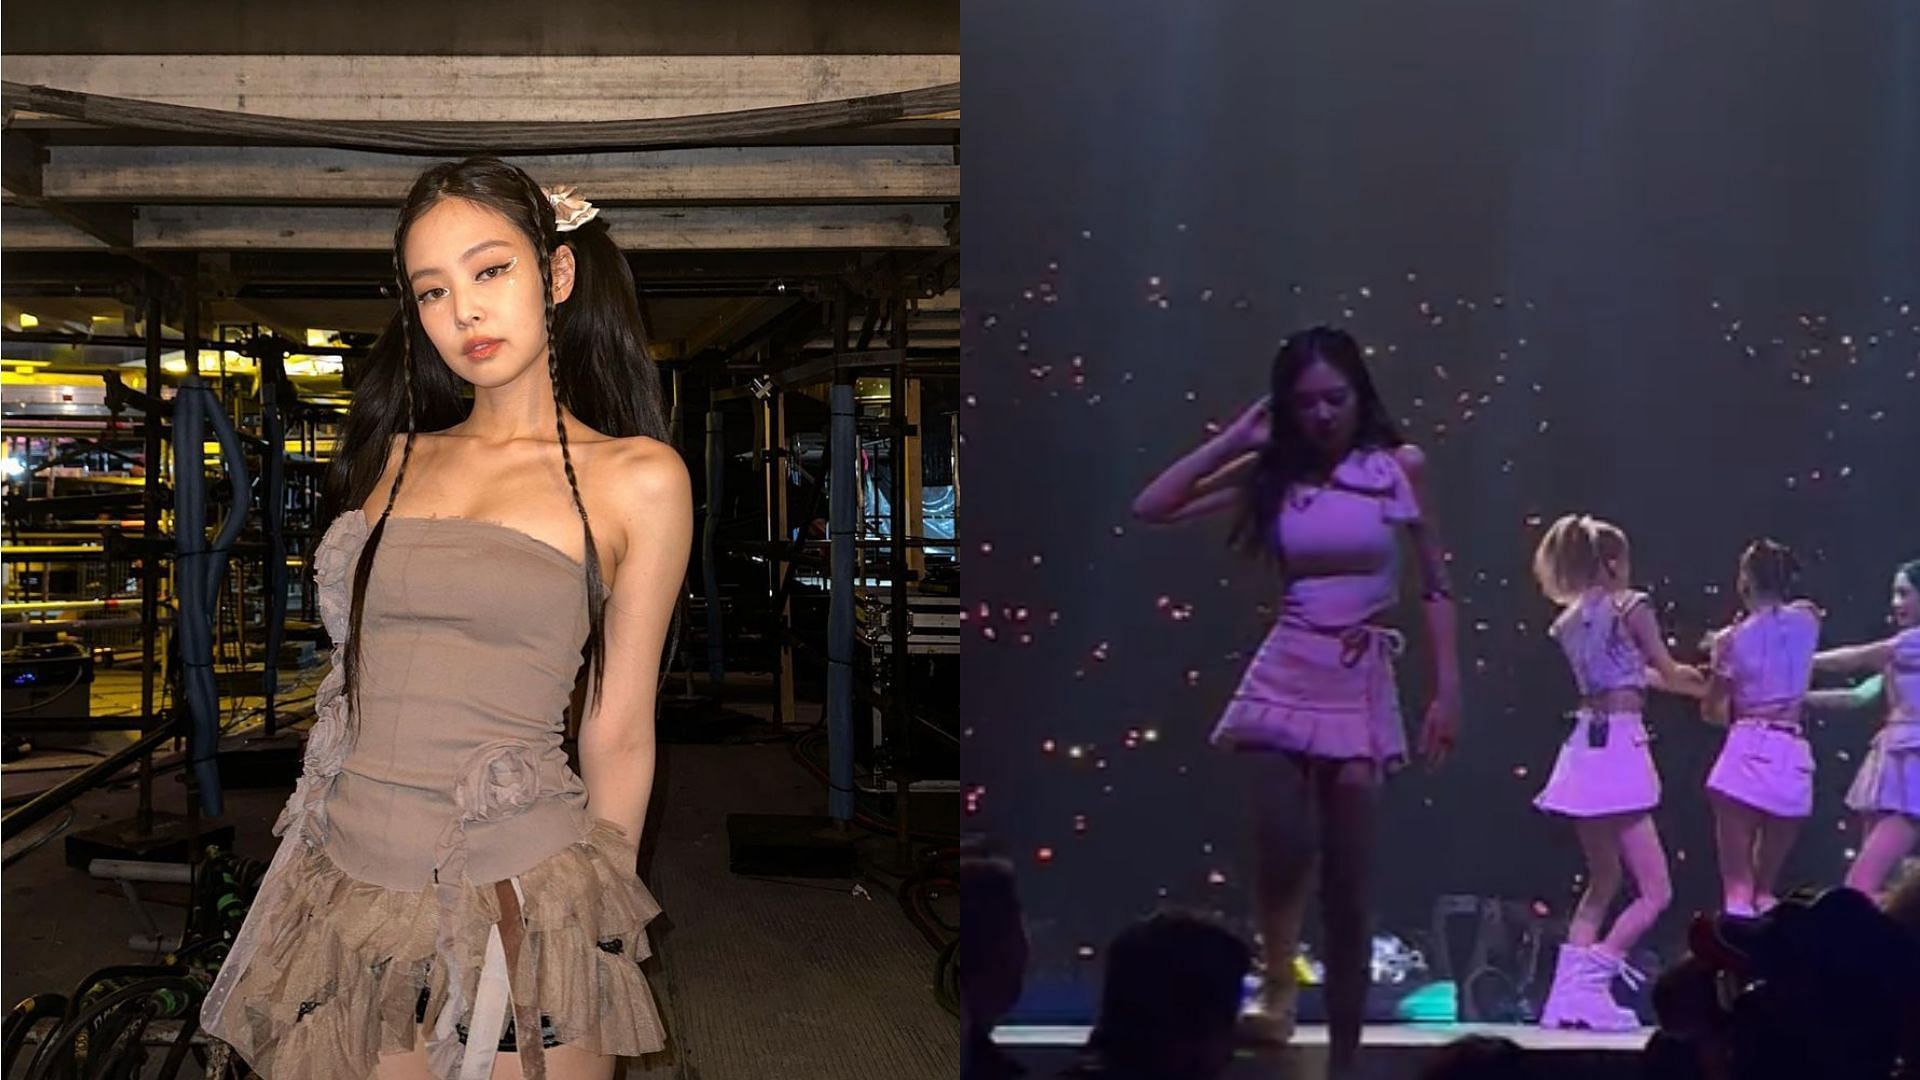 BLACKPINK's Jennie Shares Her Love For The Stage